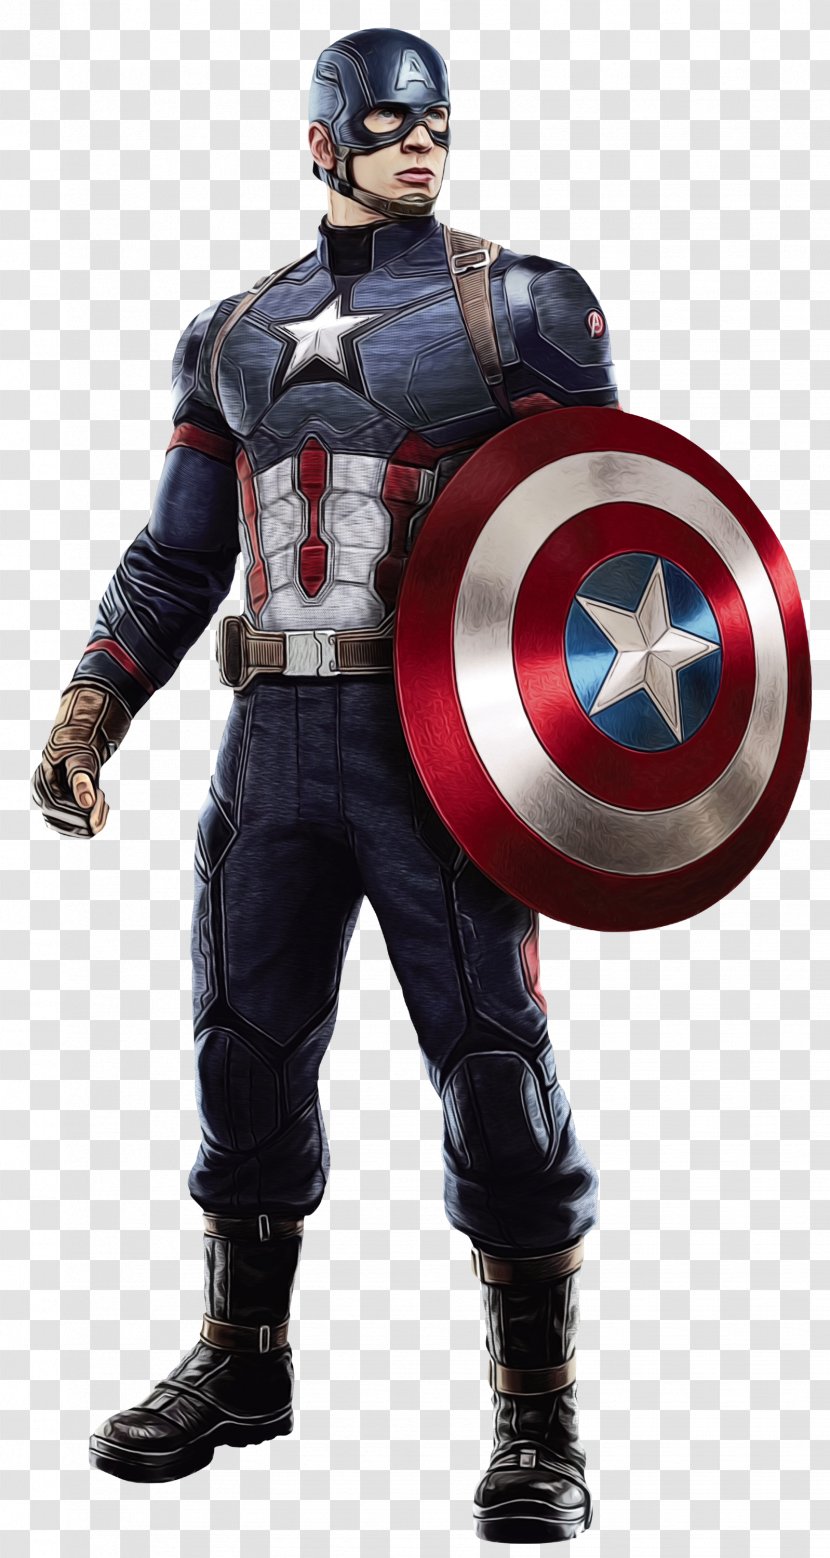 Captain America's Shield Iron Man Marvel Cinematic Universe S.H.I.E.L.D. - America The Winter Soldier Transparent PNG